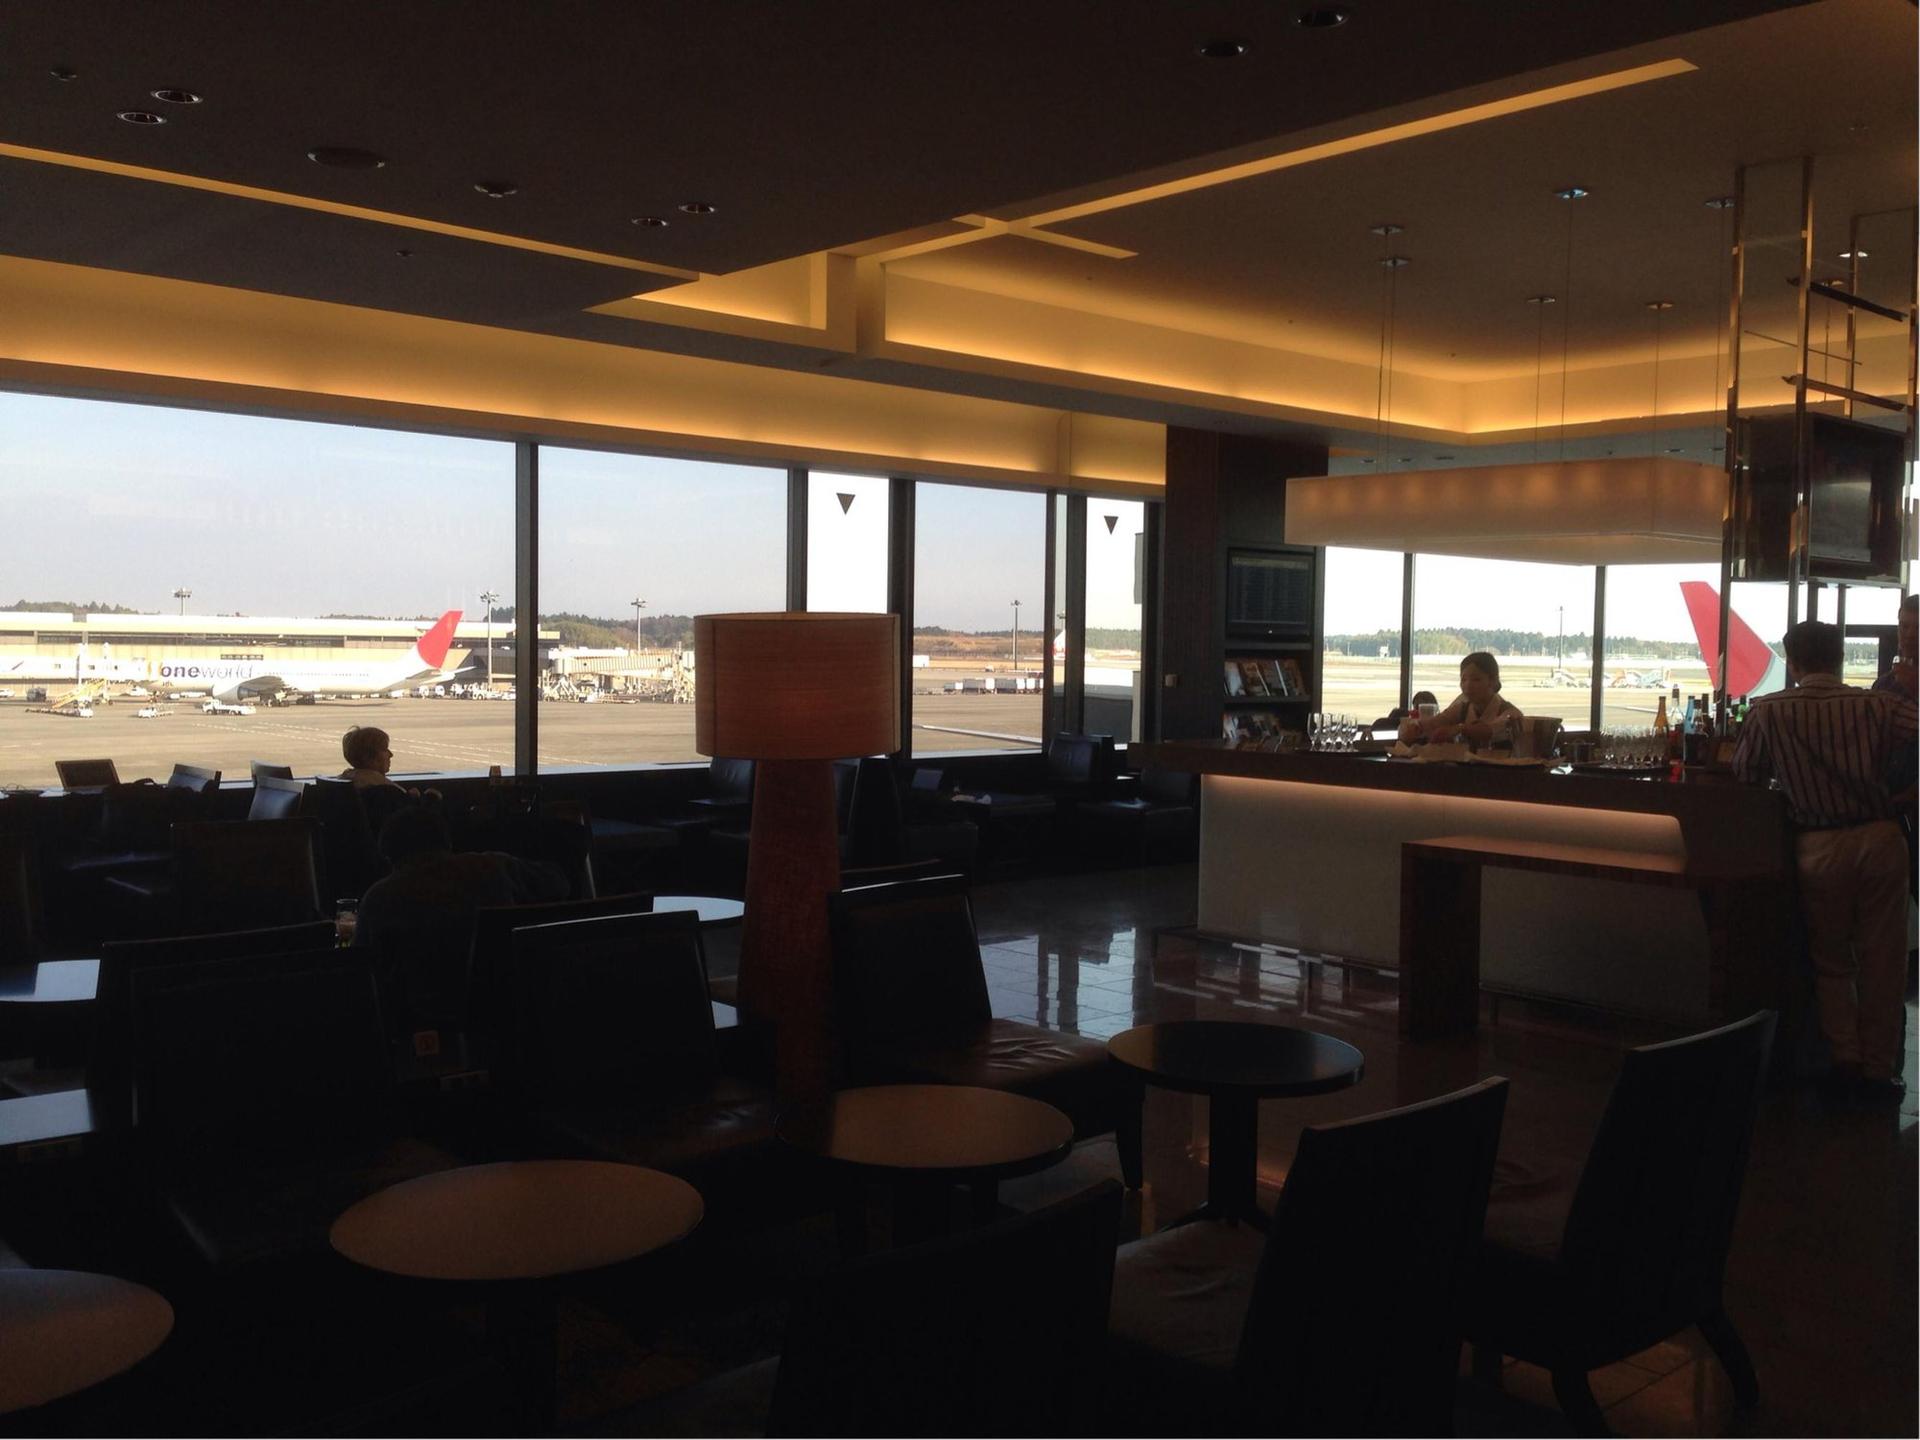 Japan Airlines JAL First Class Lounge image 17 of 50